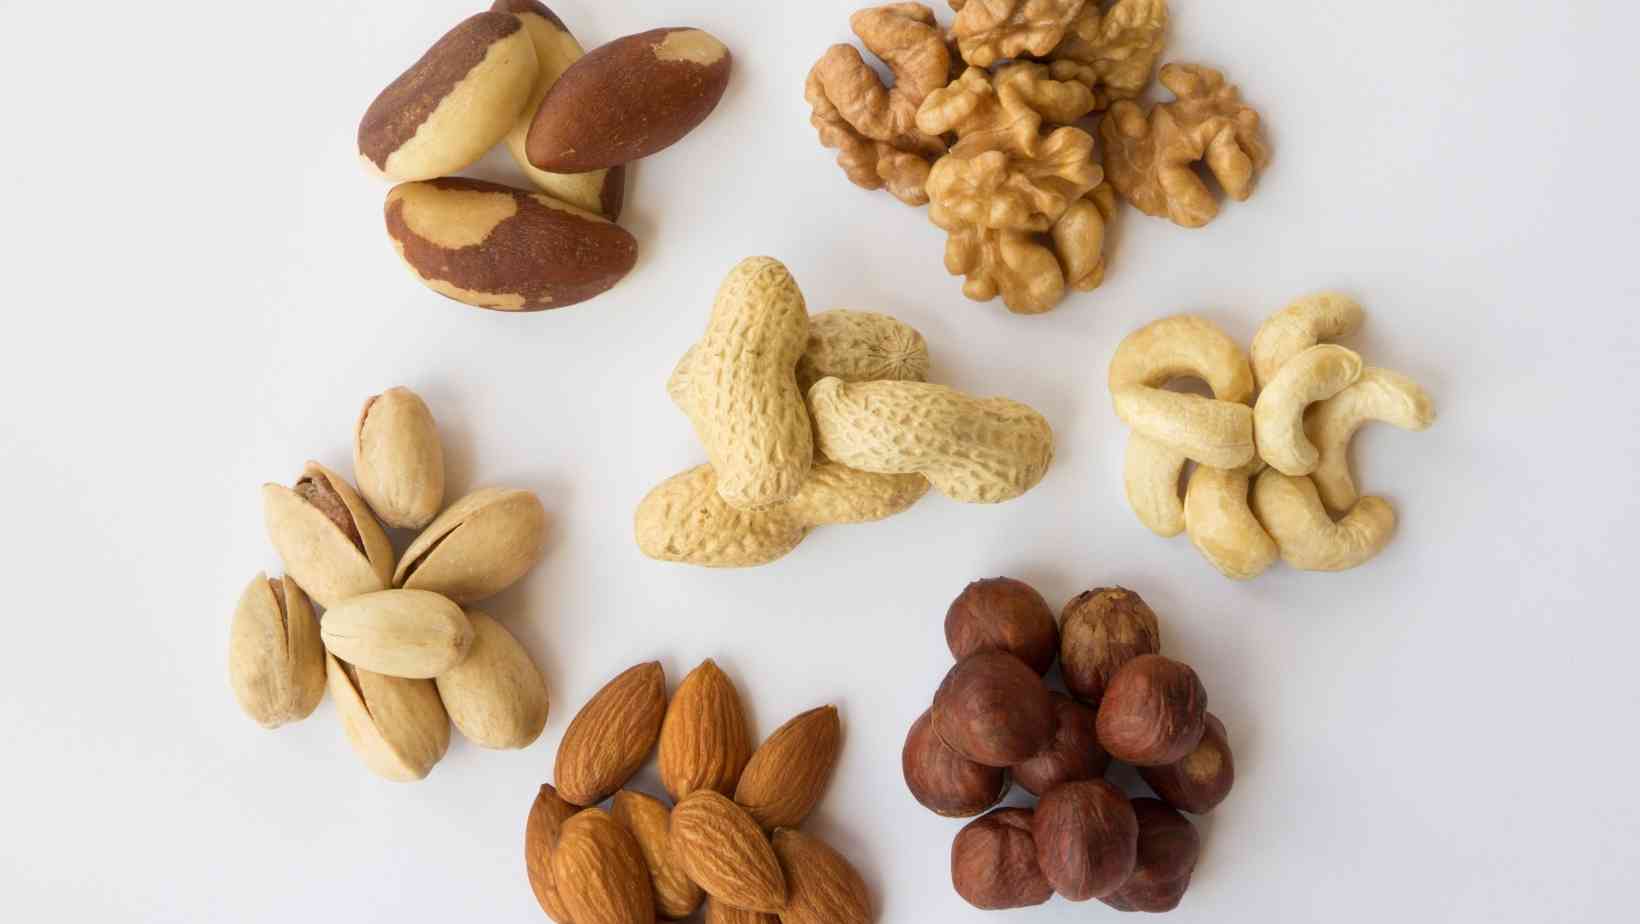 Are nuts a good source of potassium